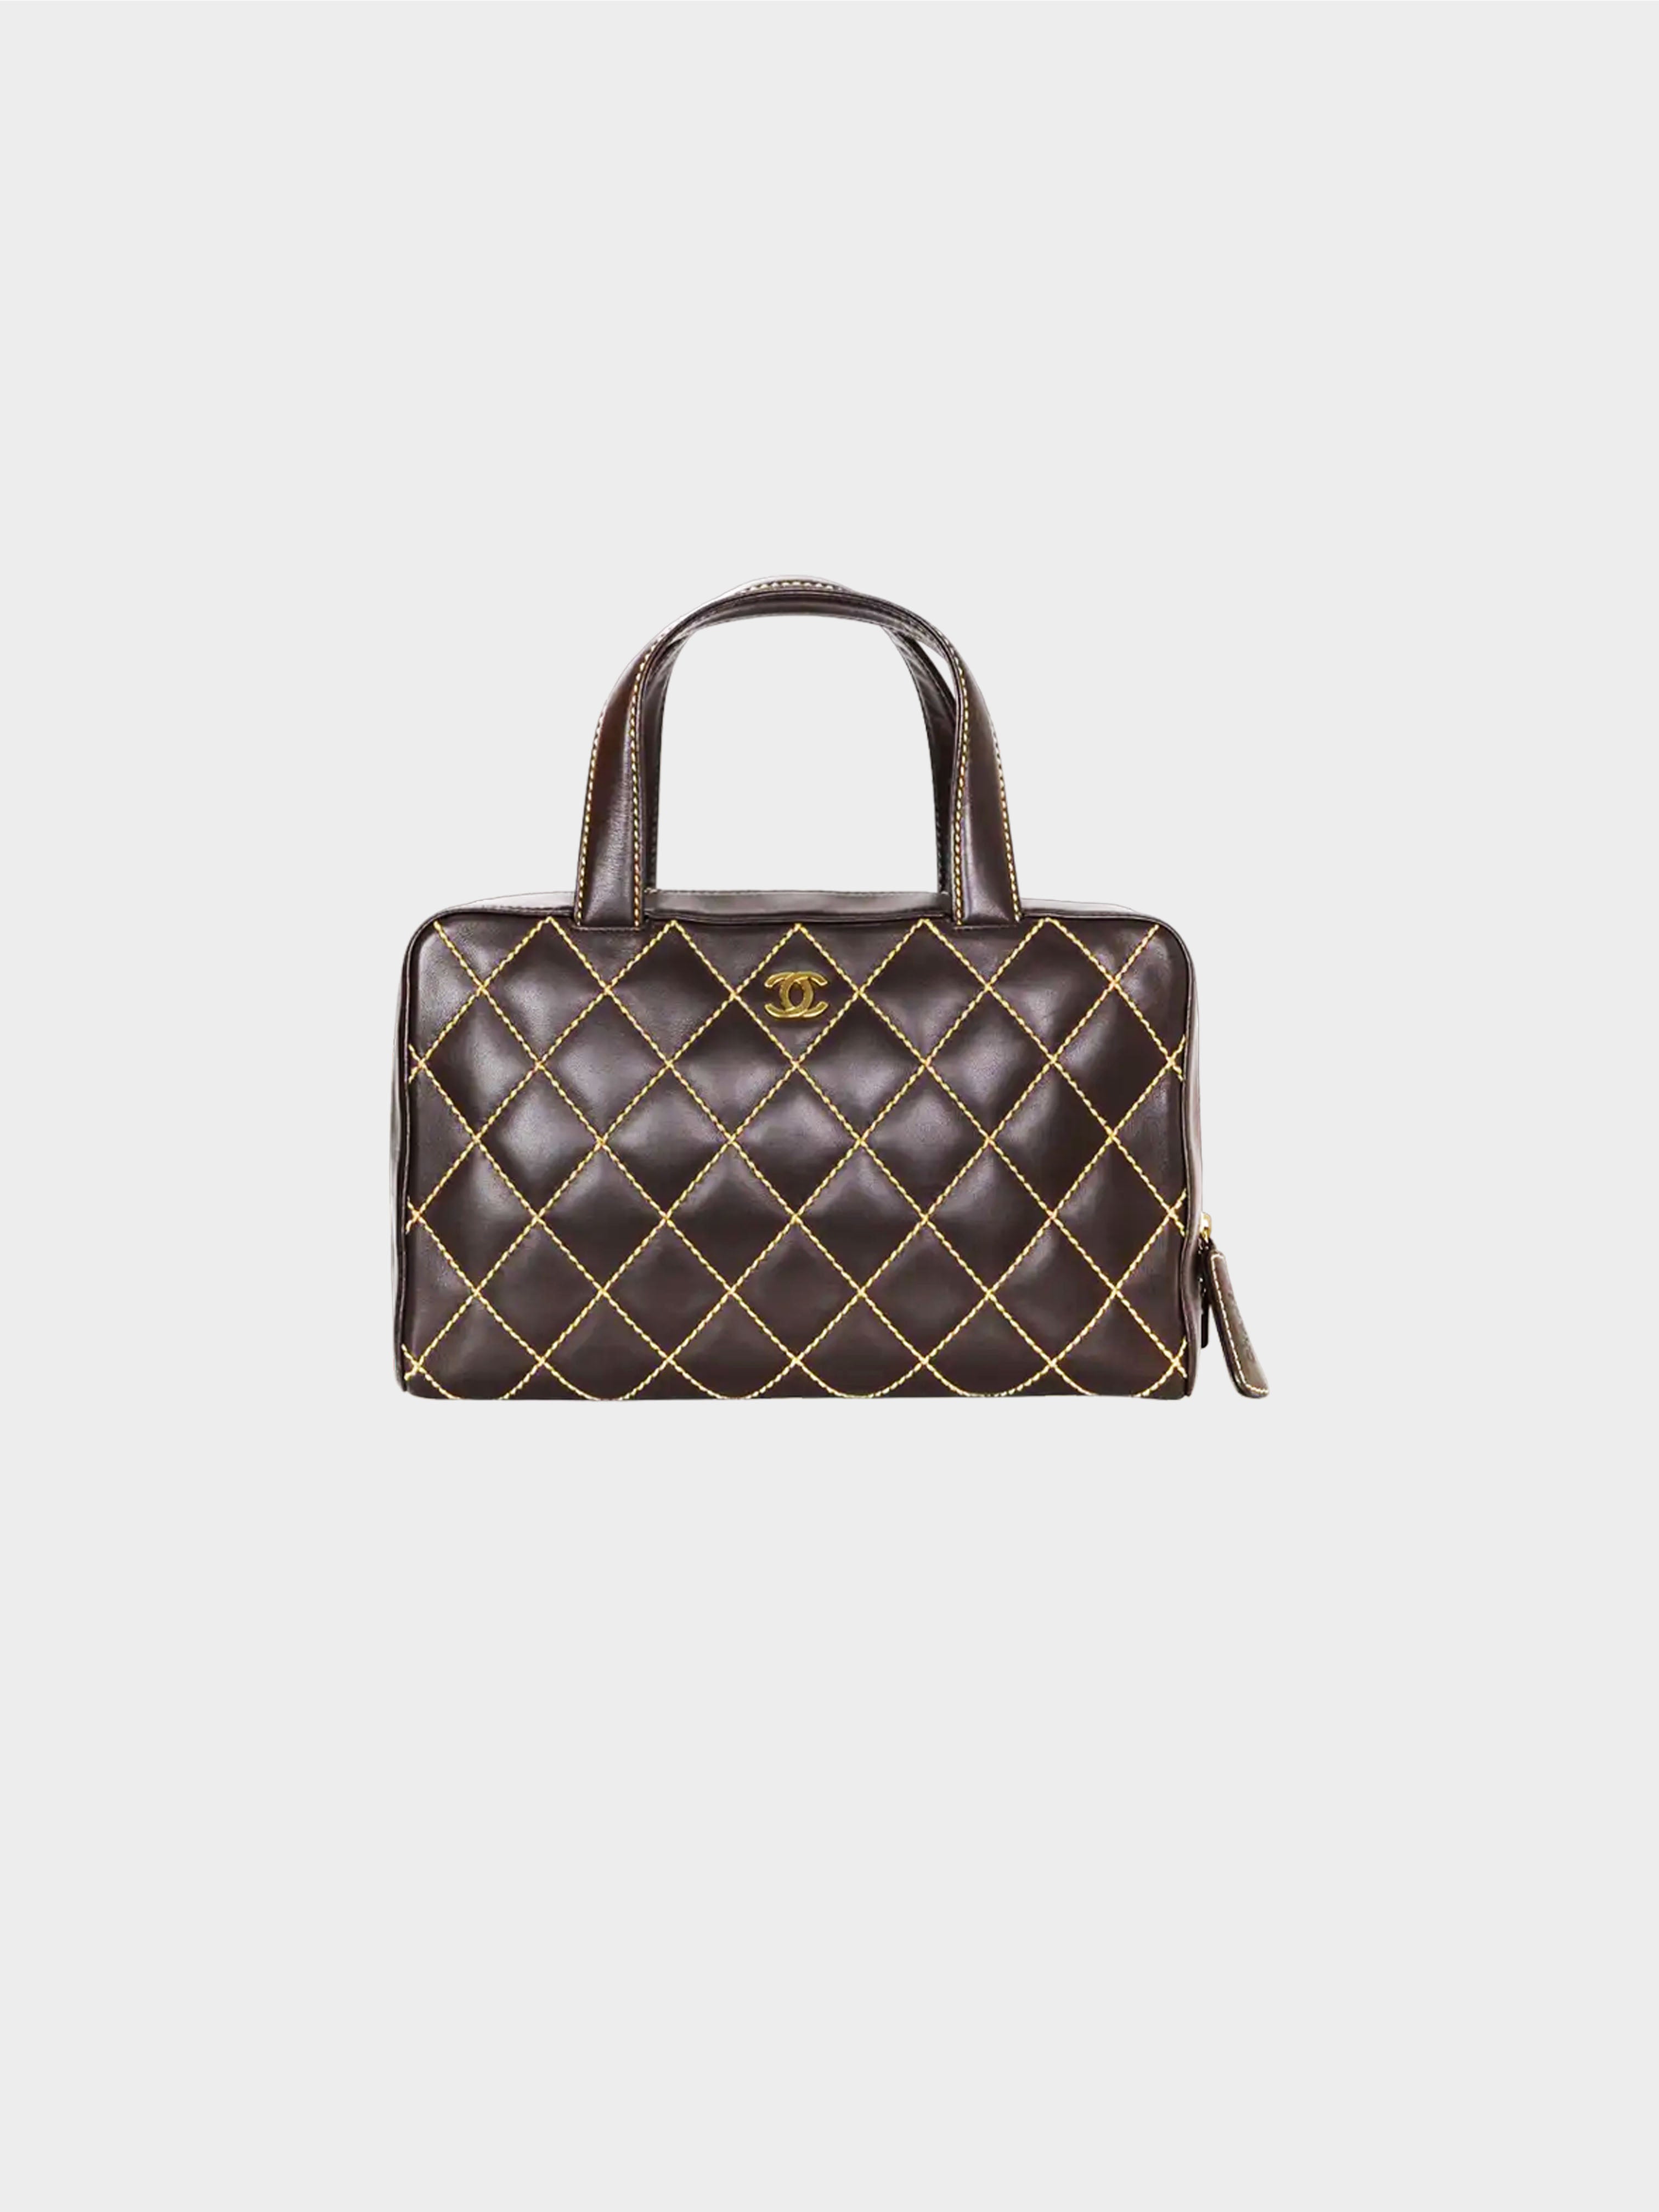 Chanel 2002 Brown Chocolate Leather Surpique Bag · INTO